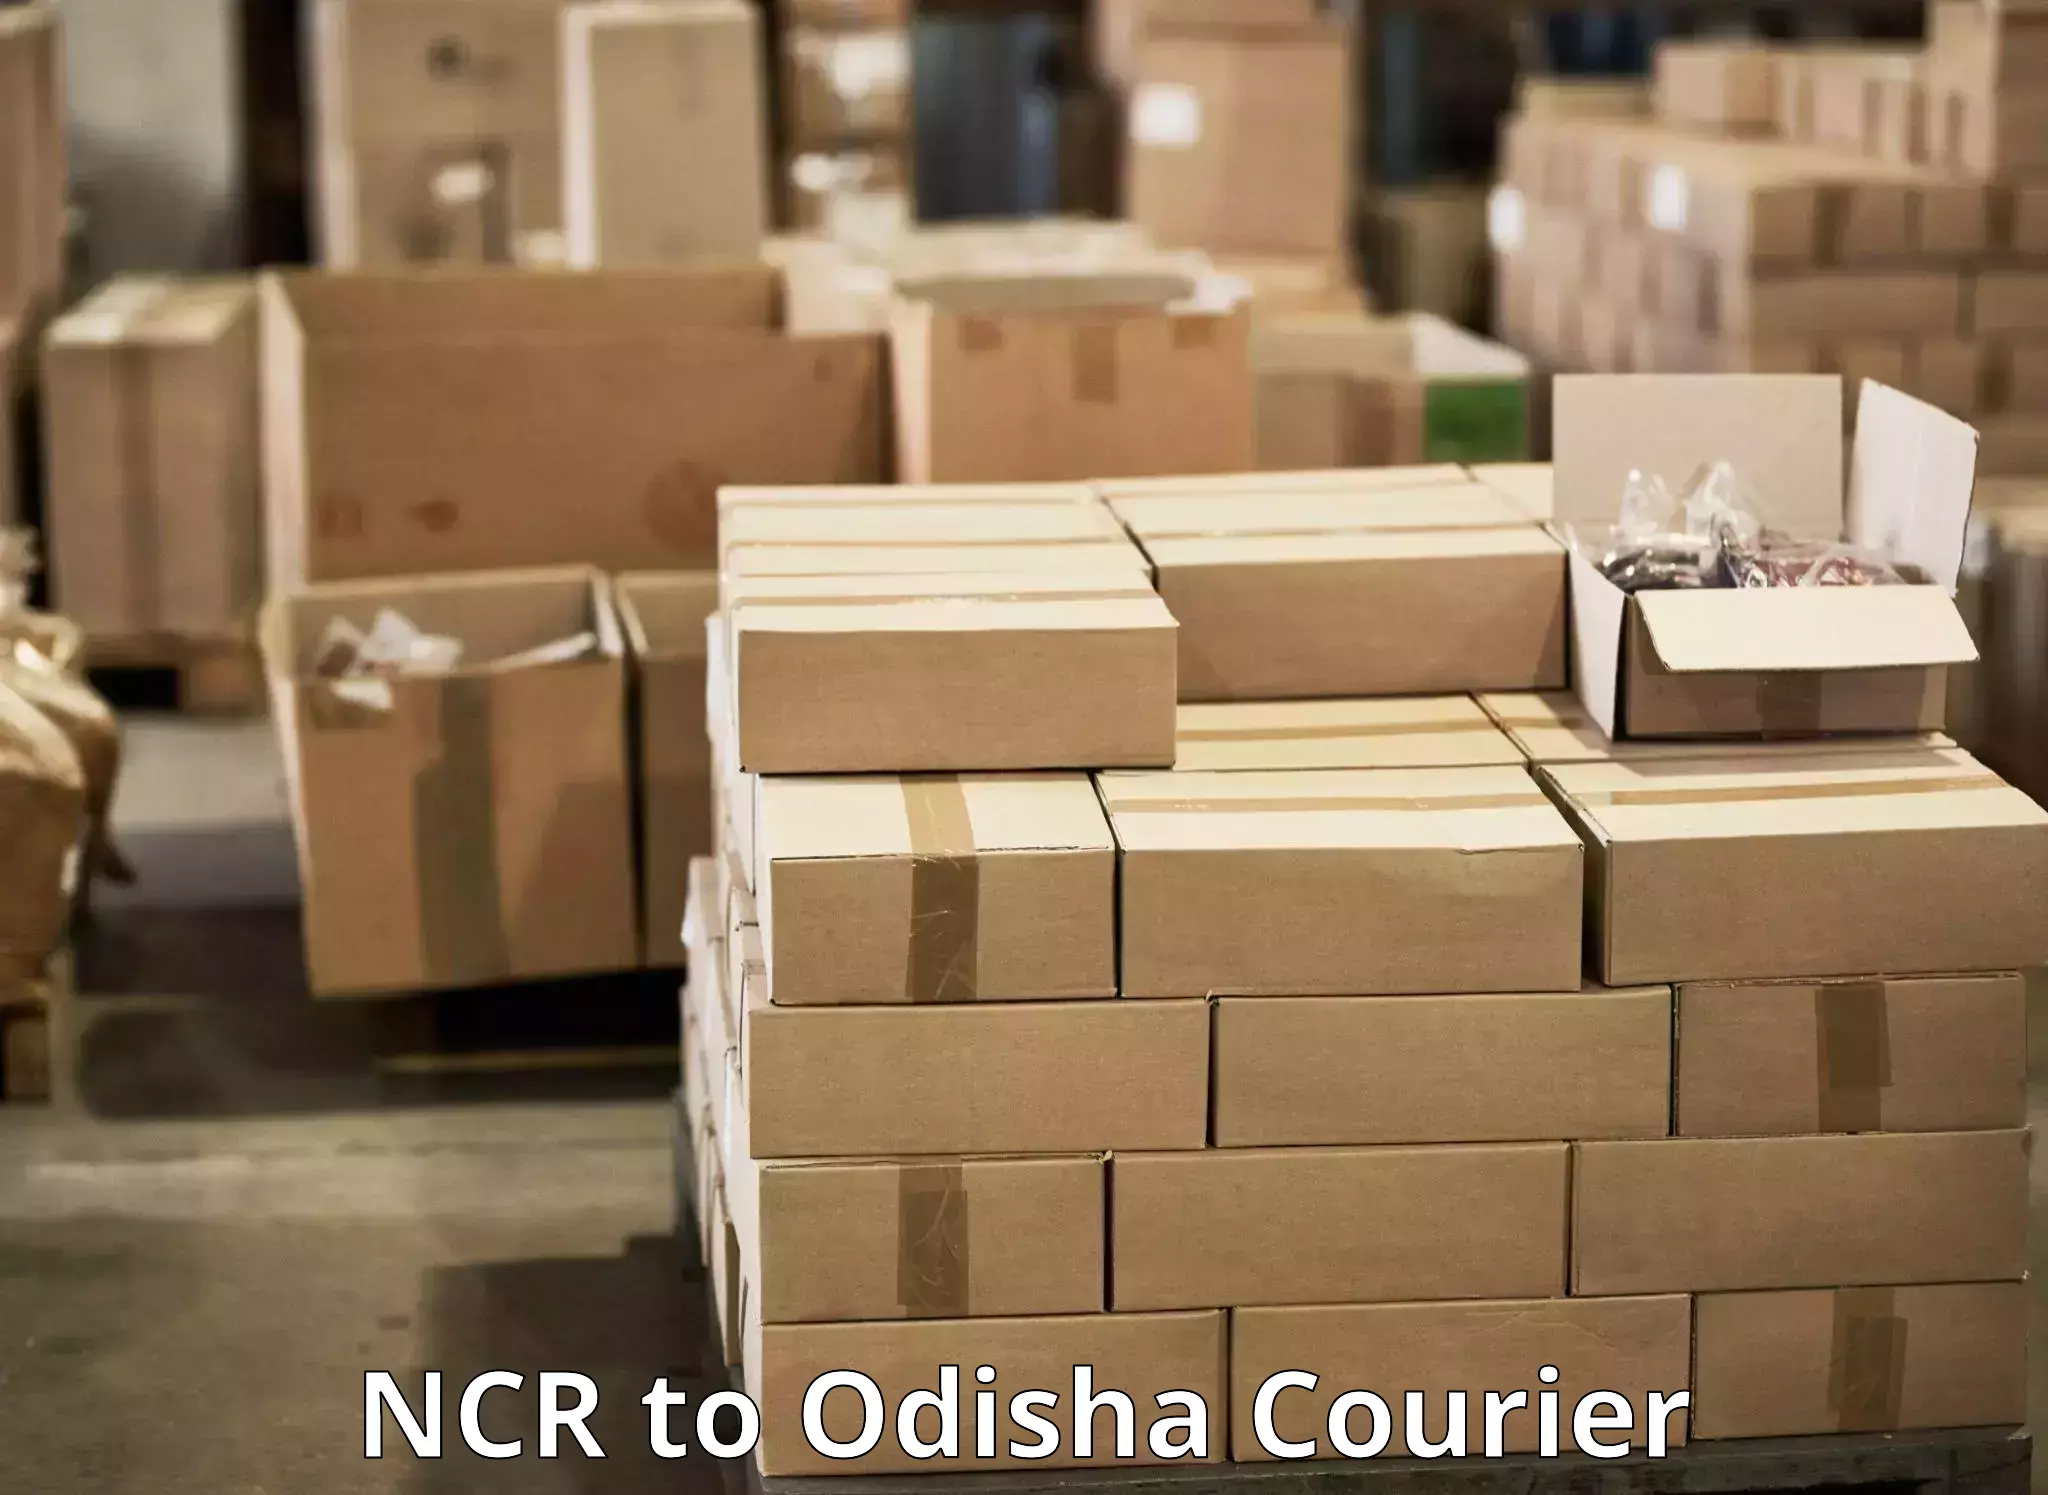 Nationwide courier service NCR to Kalimela